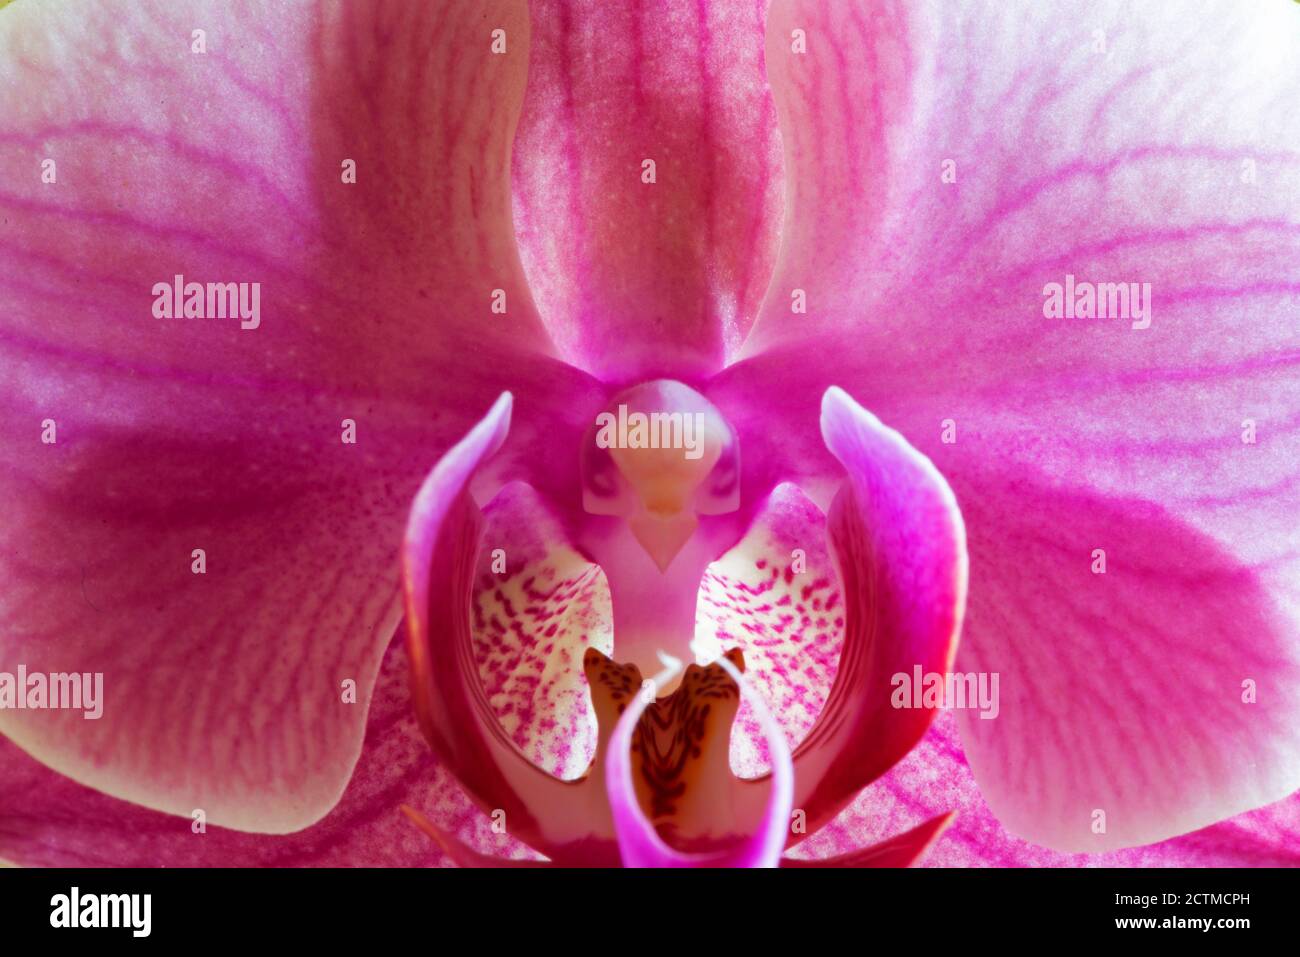 Macro photography of an orchid flower. Stock Photo